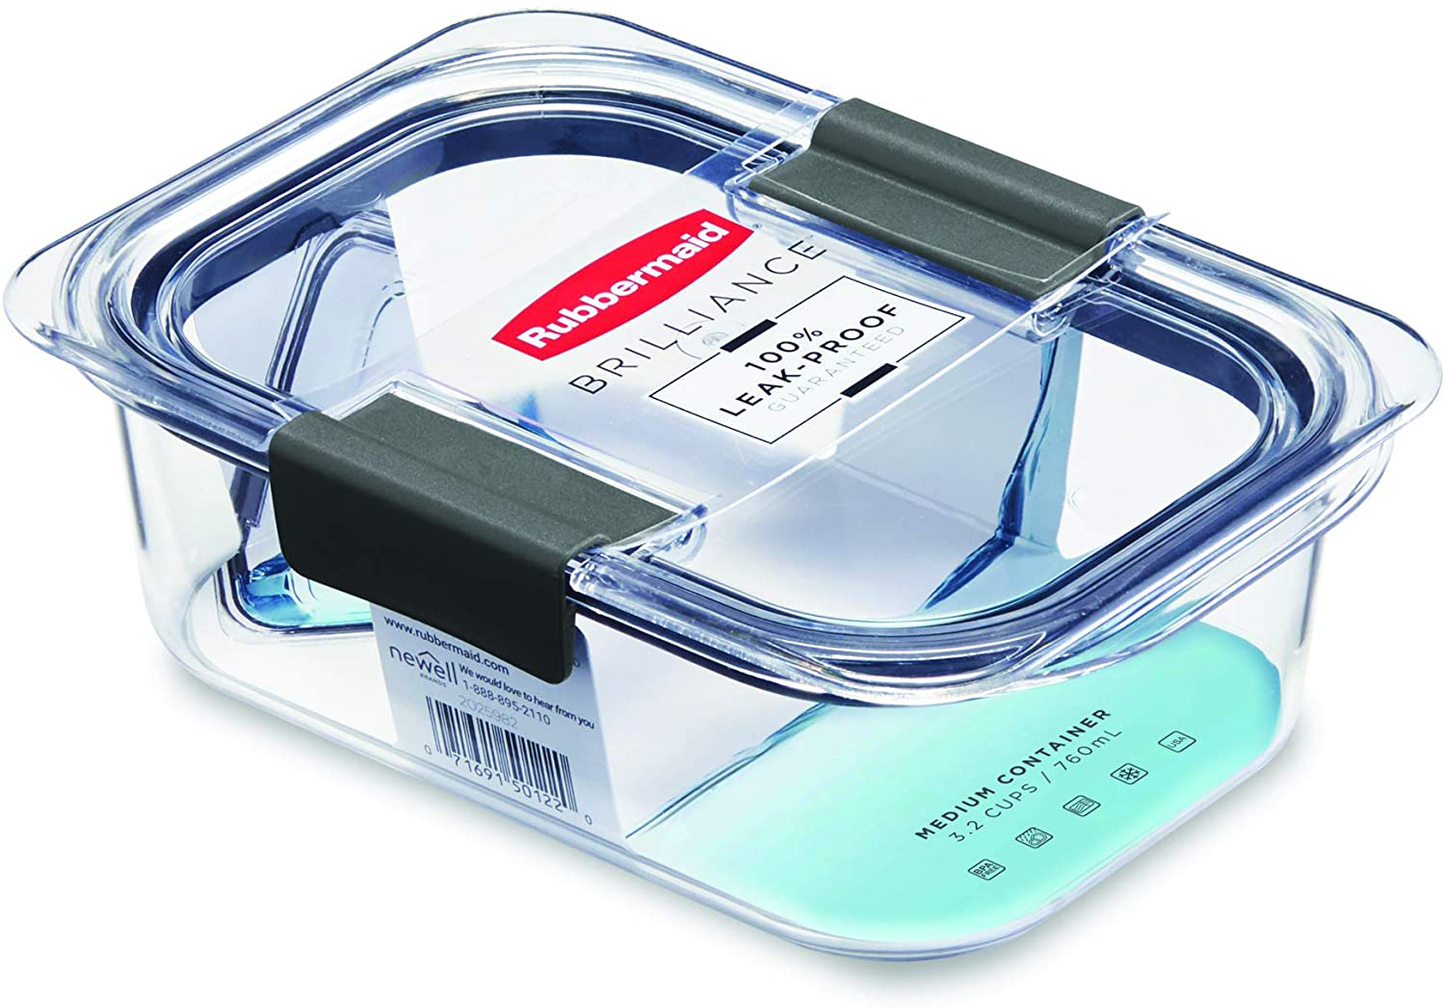 Rubbermaid Brilliance Food Storage Container